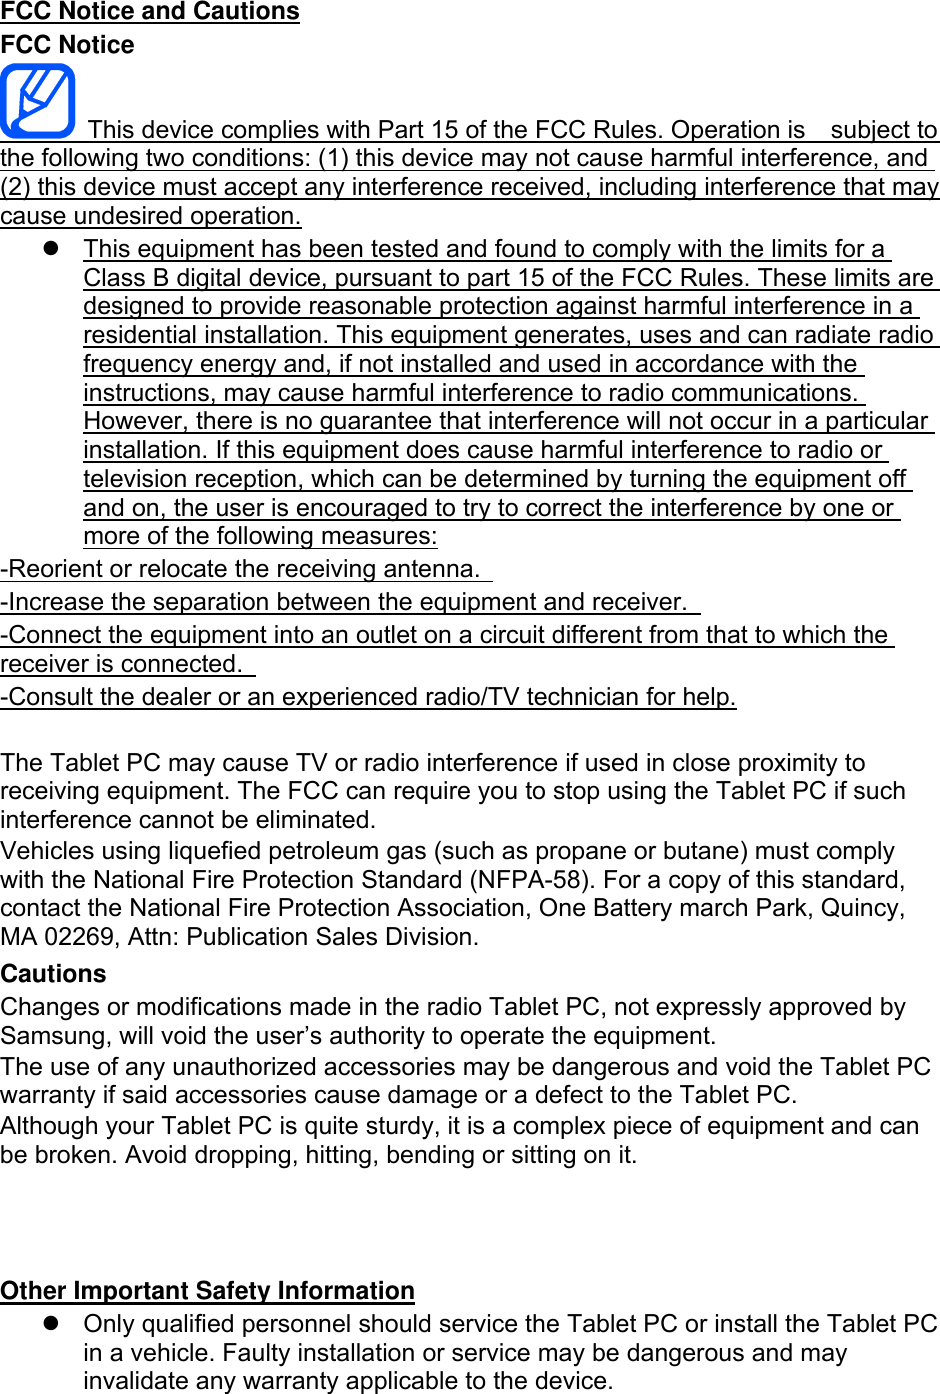 FCC Notice and Cautions FCC Notice   This device complies with Part 15 of the FCC Rules. Operation is    subject to the following two conditions: (1) this device may not cause harmful interference, and (2) this device must accept any interference received, including interference that may cause undesired operation.   This equipment has been tested and found to comply with the limits for a Class B digital device, pursuant to part 15 of the FCC Rules. These limits are designed to provide reasonable protection against harmful interference in a residential installation. This equipment generates, uses and can radiate radio frequency energy and, if not installed and used in accordance with the instructions, may cause harmful interference to radio communications. However, there is no guarantee that interference will not occur in a particular installation. If this equipment does cause harmful interference to radio or television reception, which can be determined by turning the equipment off and on, the user is encouraged to try to correct the interference by one or more of the following measures: -Reorient or relocate the receiving antenna.   -Increase the separation between the equipment and receiver.   -Connect the equipment into an outlet on a circuit different from that to which the receiver is connected.   -Consult the dealer or an experienced radio/TV technician for help.  The Tablet PC may cause TV or radio interference if used in close proximity to receiving equipment. The FCC can require you to stop using the Tablet PC if such interference cannot be eliminated. Vehicles using liquefied petroleum gas (such as propane or butane) must comply with the National Fire Protection Standard (NFPA-58). For a copy of this standard, contact the National Fire Protection Association, One Battery march Park, Quincy, MA 02269, Attn: Publication Sales Division. Cautions Changes or modifications made in the radio Tablet PC, not expressly approved by Samsung, will void the user’s authority to operate the equipment. The use of any unauthorized accessories may be dangerous and void the Tablet PC warranty if said accessories cause damage or a defect to the Tablet PC. Although your Tablet PC is quite sturdy, it is a complex piece of equipment and can be broken. Avoid dropping, hitting, bending or sitting on it.    Other Important Safety Information   Only qualified personnel should service the Tablet PC or install the Tablet PC in a vehicle. Faulty installation or service may be dangerous and may invalidate any warranty applicable to the device. 